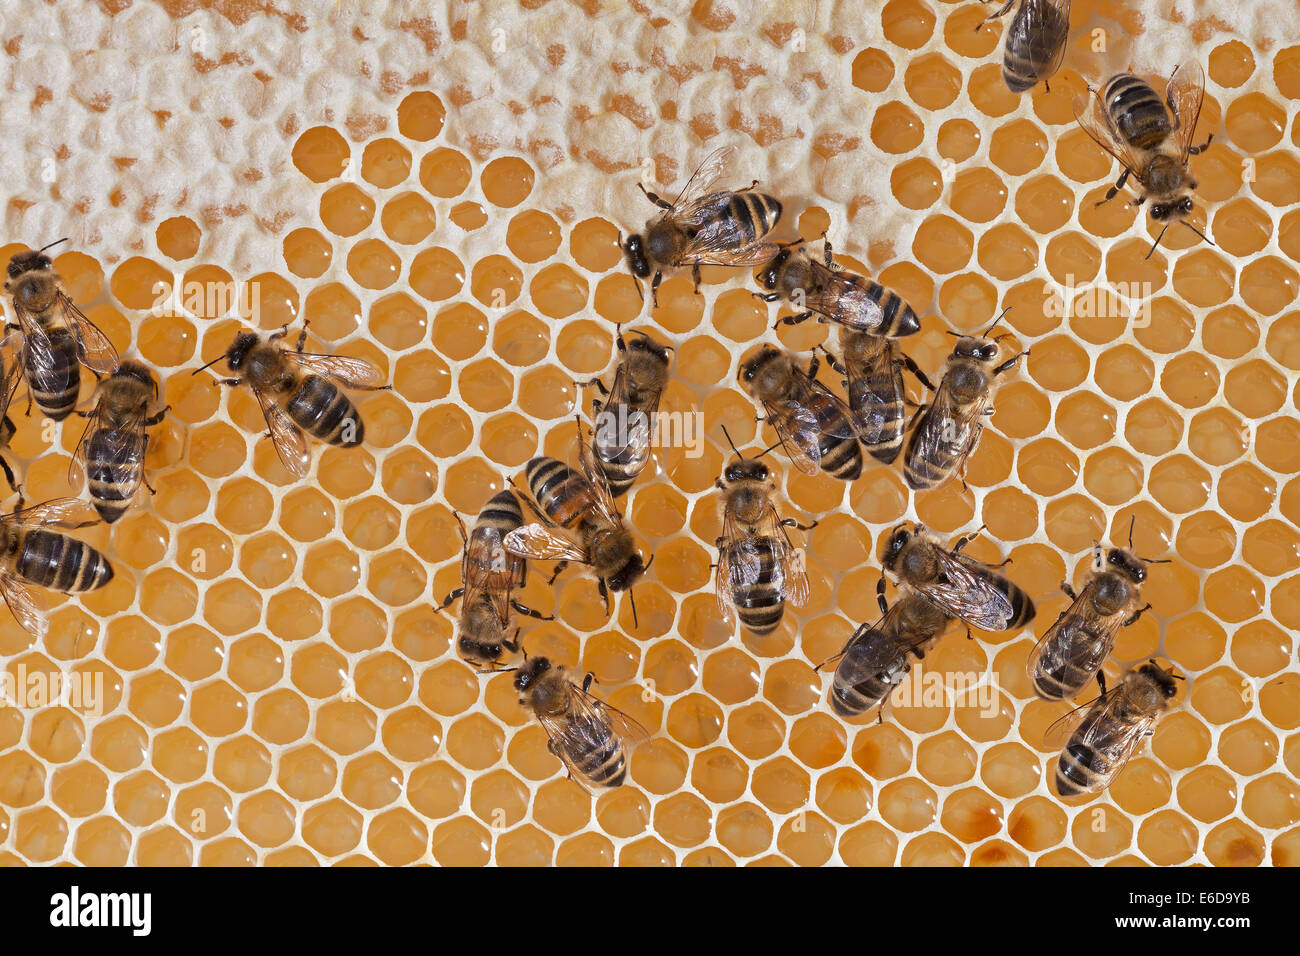 English worker honeybees in hive checking to make sure honey store is ready for capping with white beeswax. UK Stock Photo